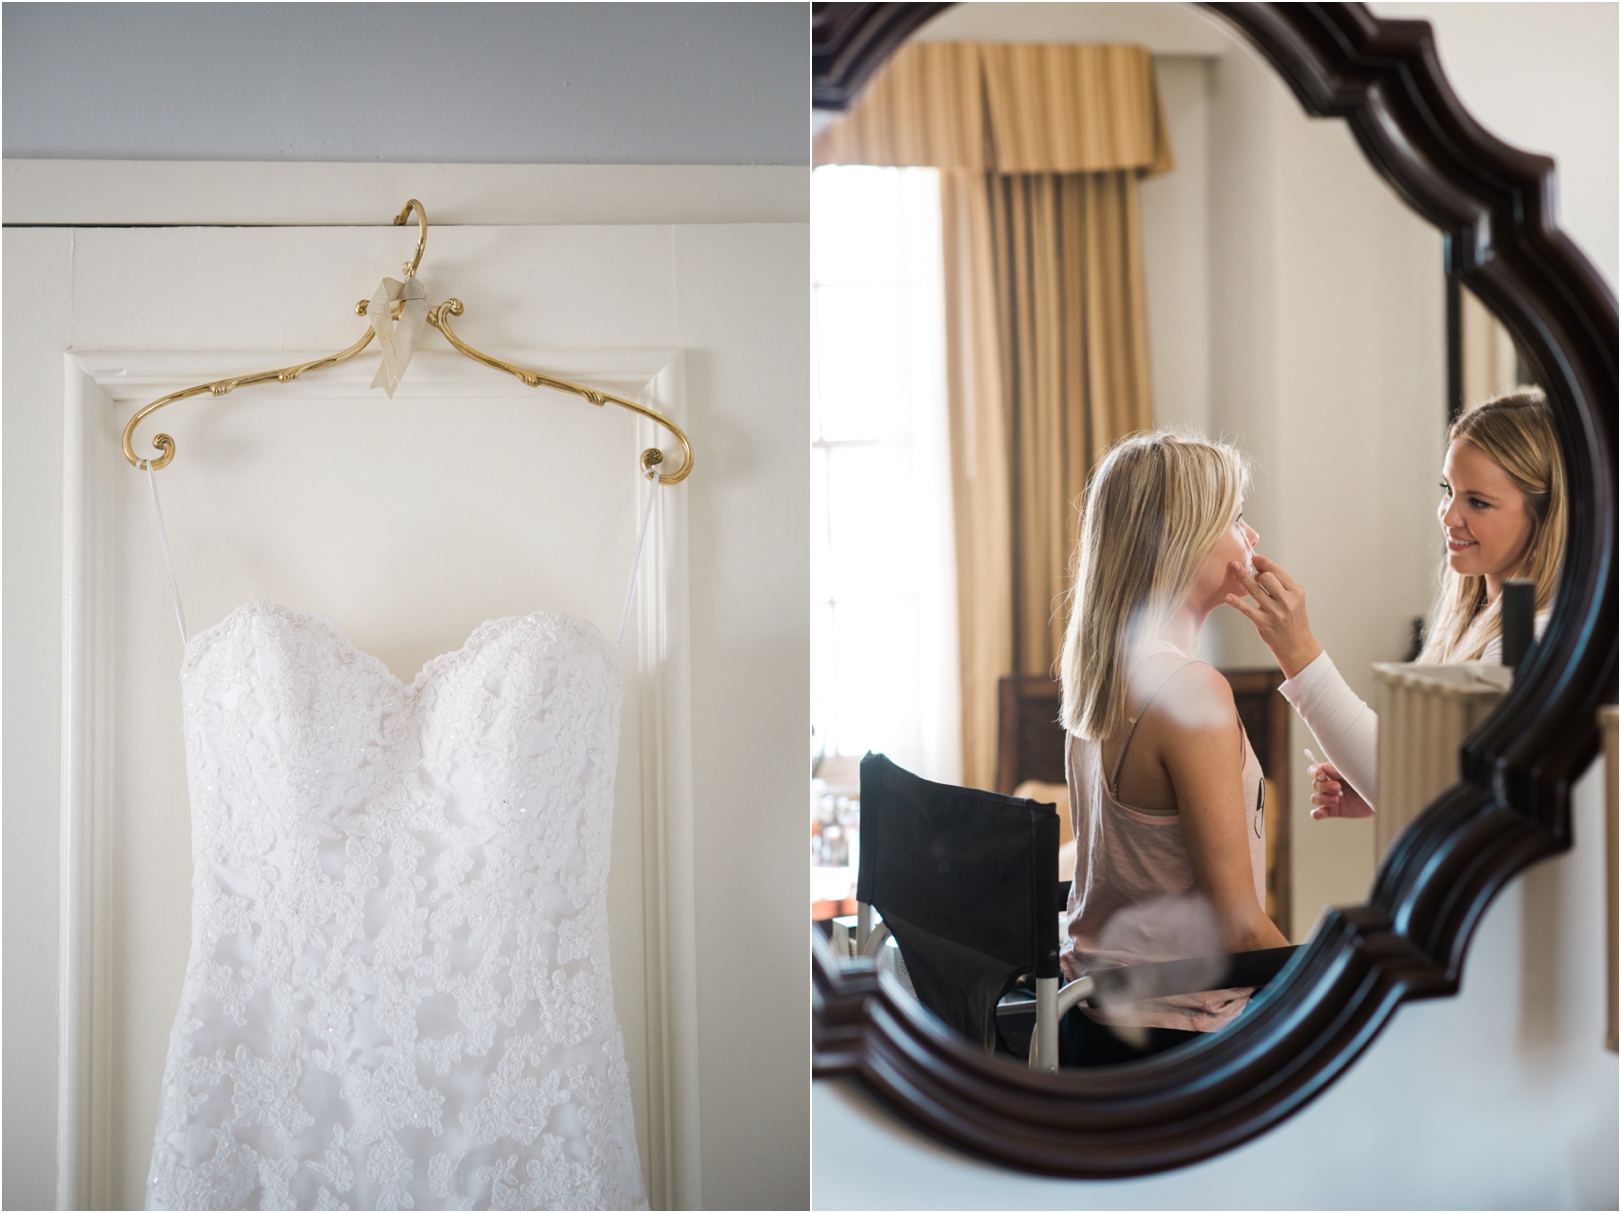 BHLDN dress hanger getting ready images from wedding day